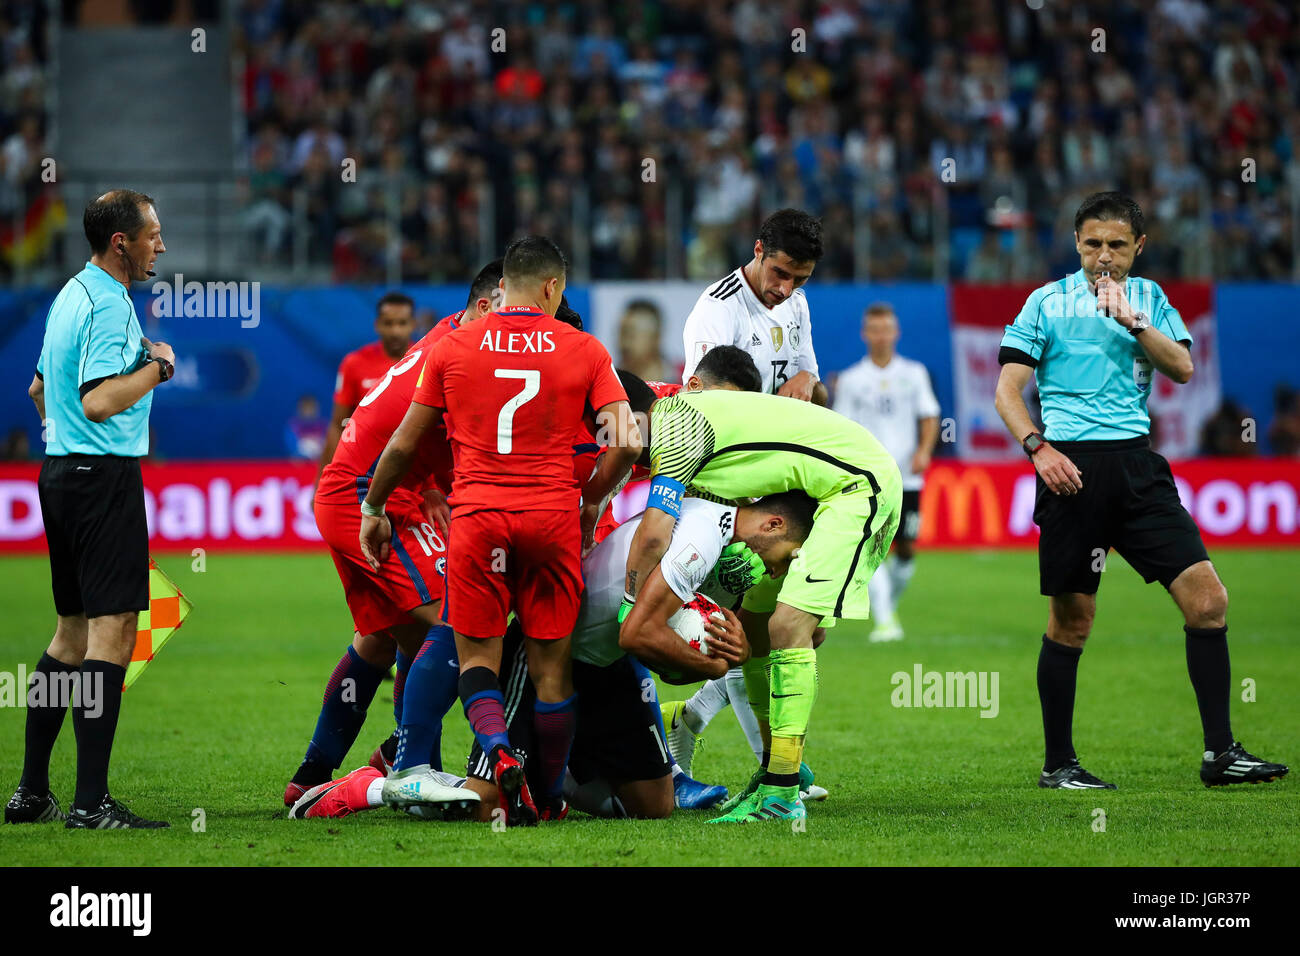 Saint Petersburg, Russia. 2nd July, 2017. Germany's Emre Can (2-R), Chile's goalkeeper Claudio Bravo (R) and other players vie for the ball during the Confederations Cup finale between Chile and Germany at the Saint Petersburg Stadium in Saint Petersburg, Russia, 2 July 2017. Photo: Christian Charisius/dpa/Alamy Live News Stock Photo